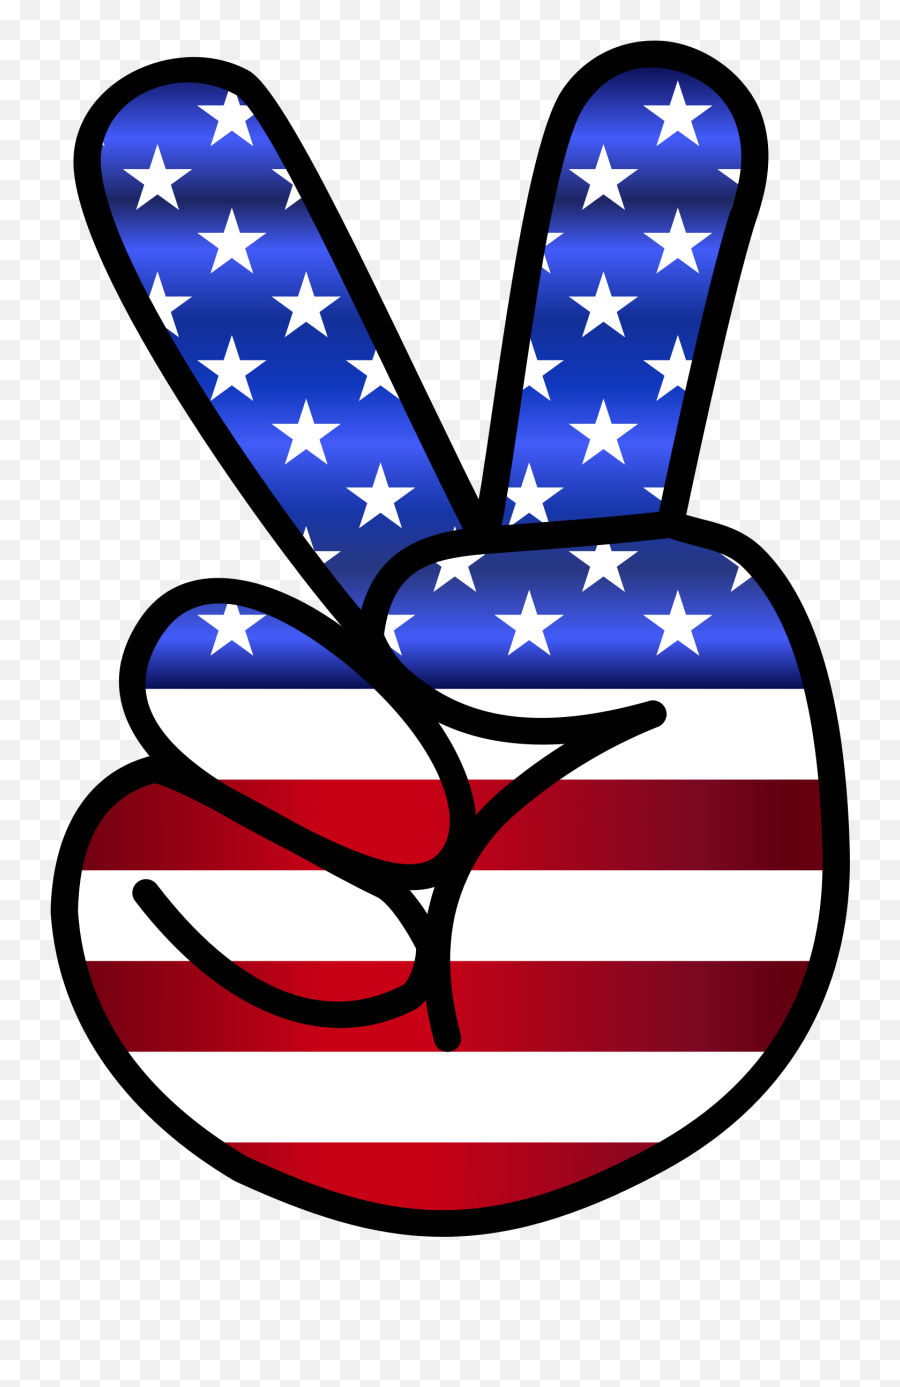 American Peace Hand Sign - Peace Sign American Flag Meaning Emoji,Peace Sign Emoji